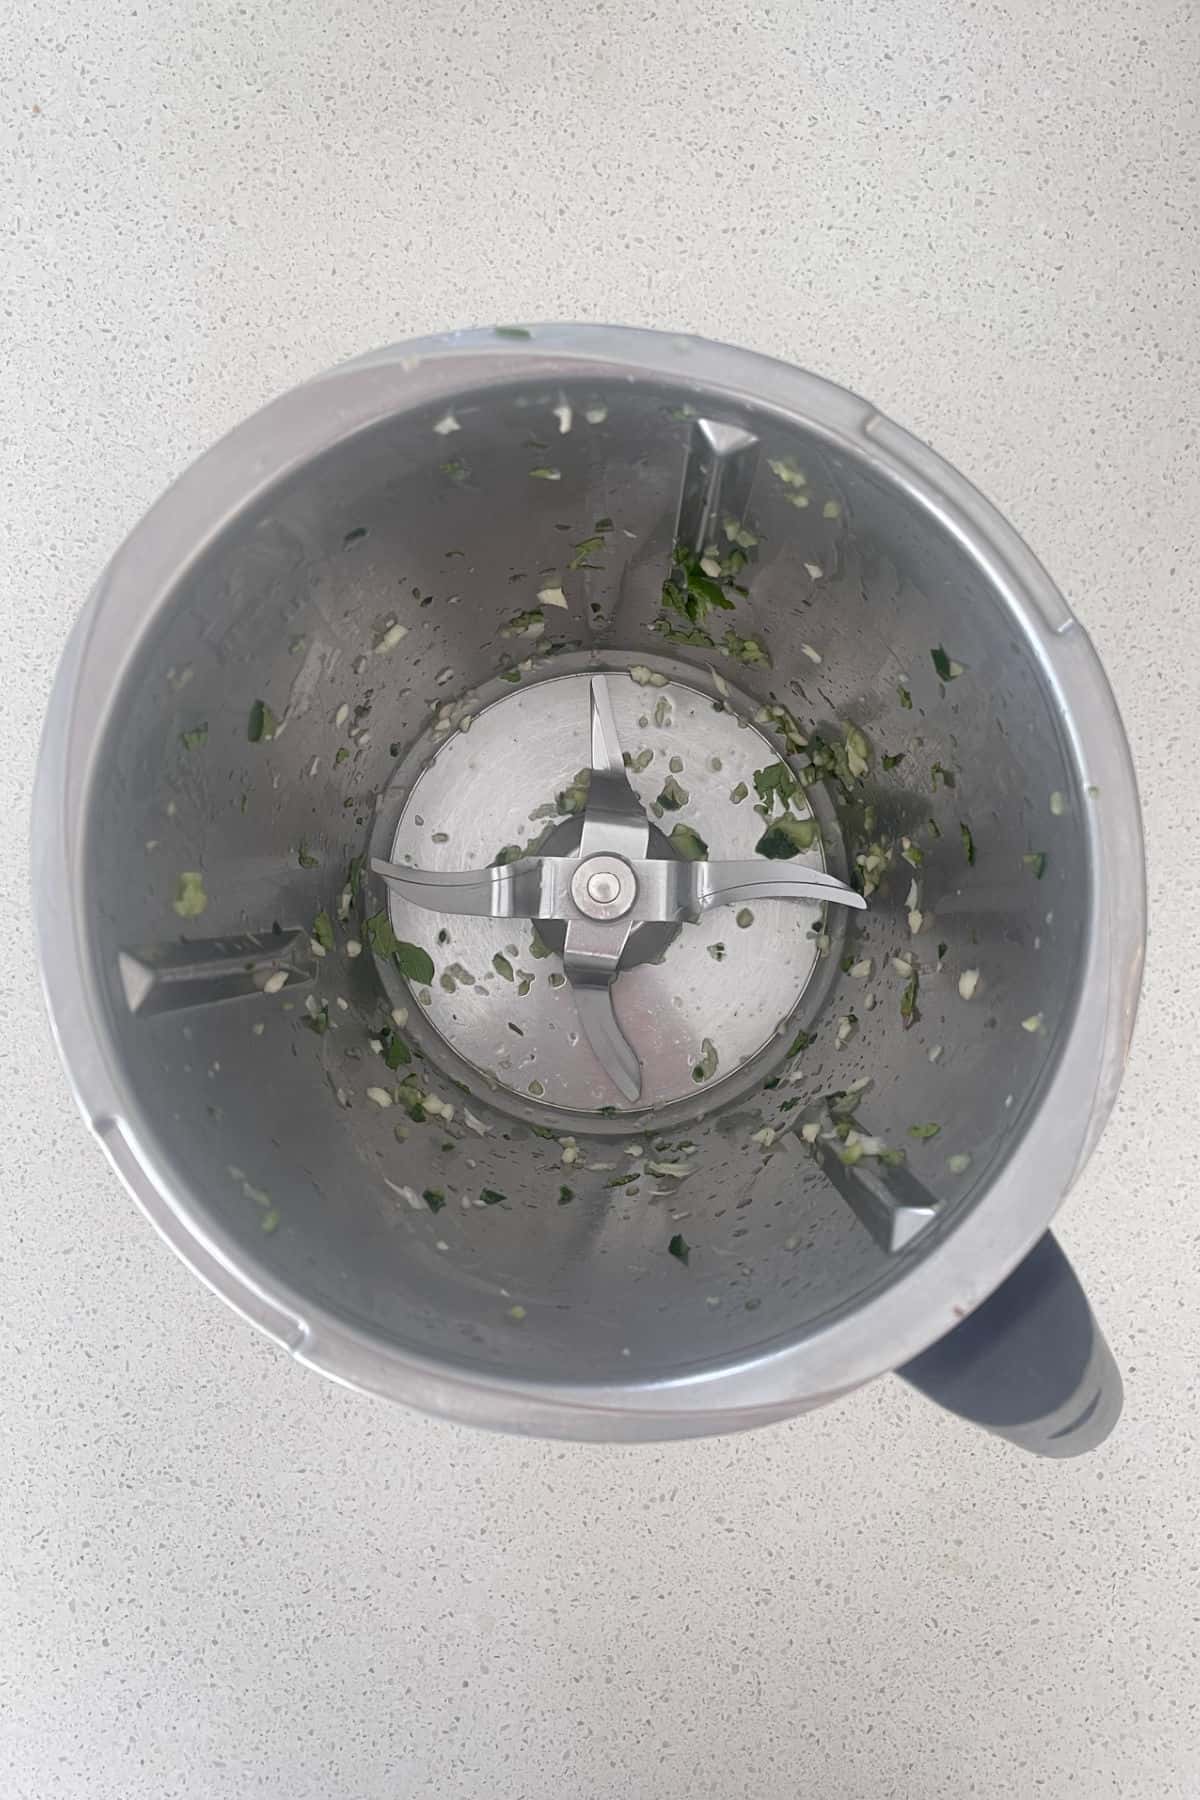 garlic and mint in a thermomix bowl.